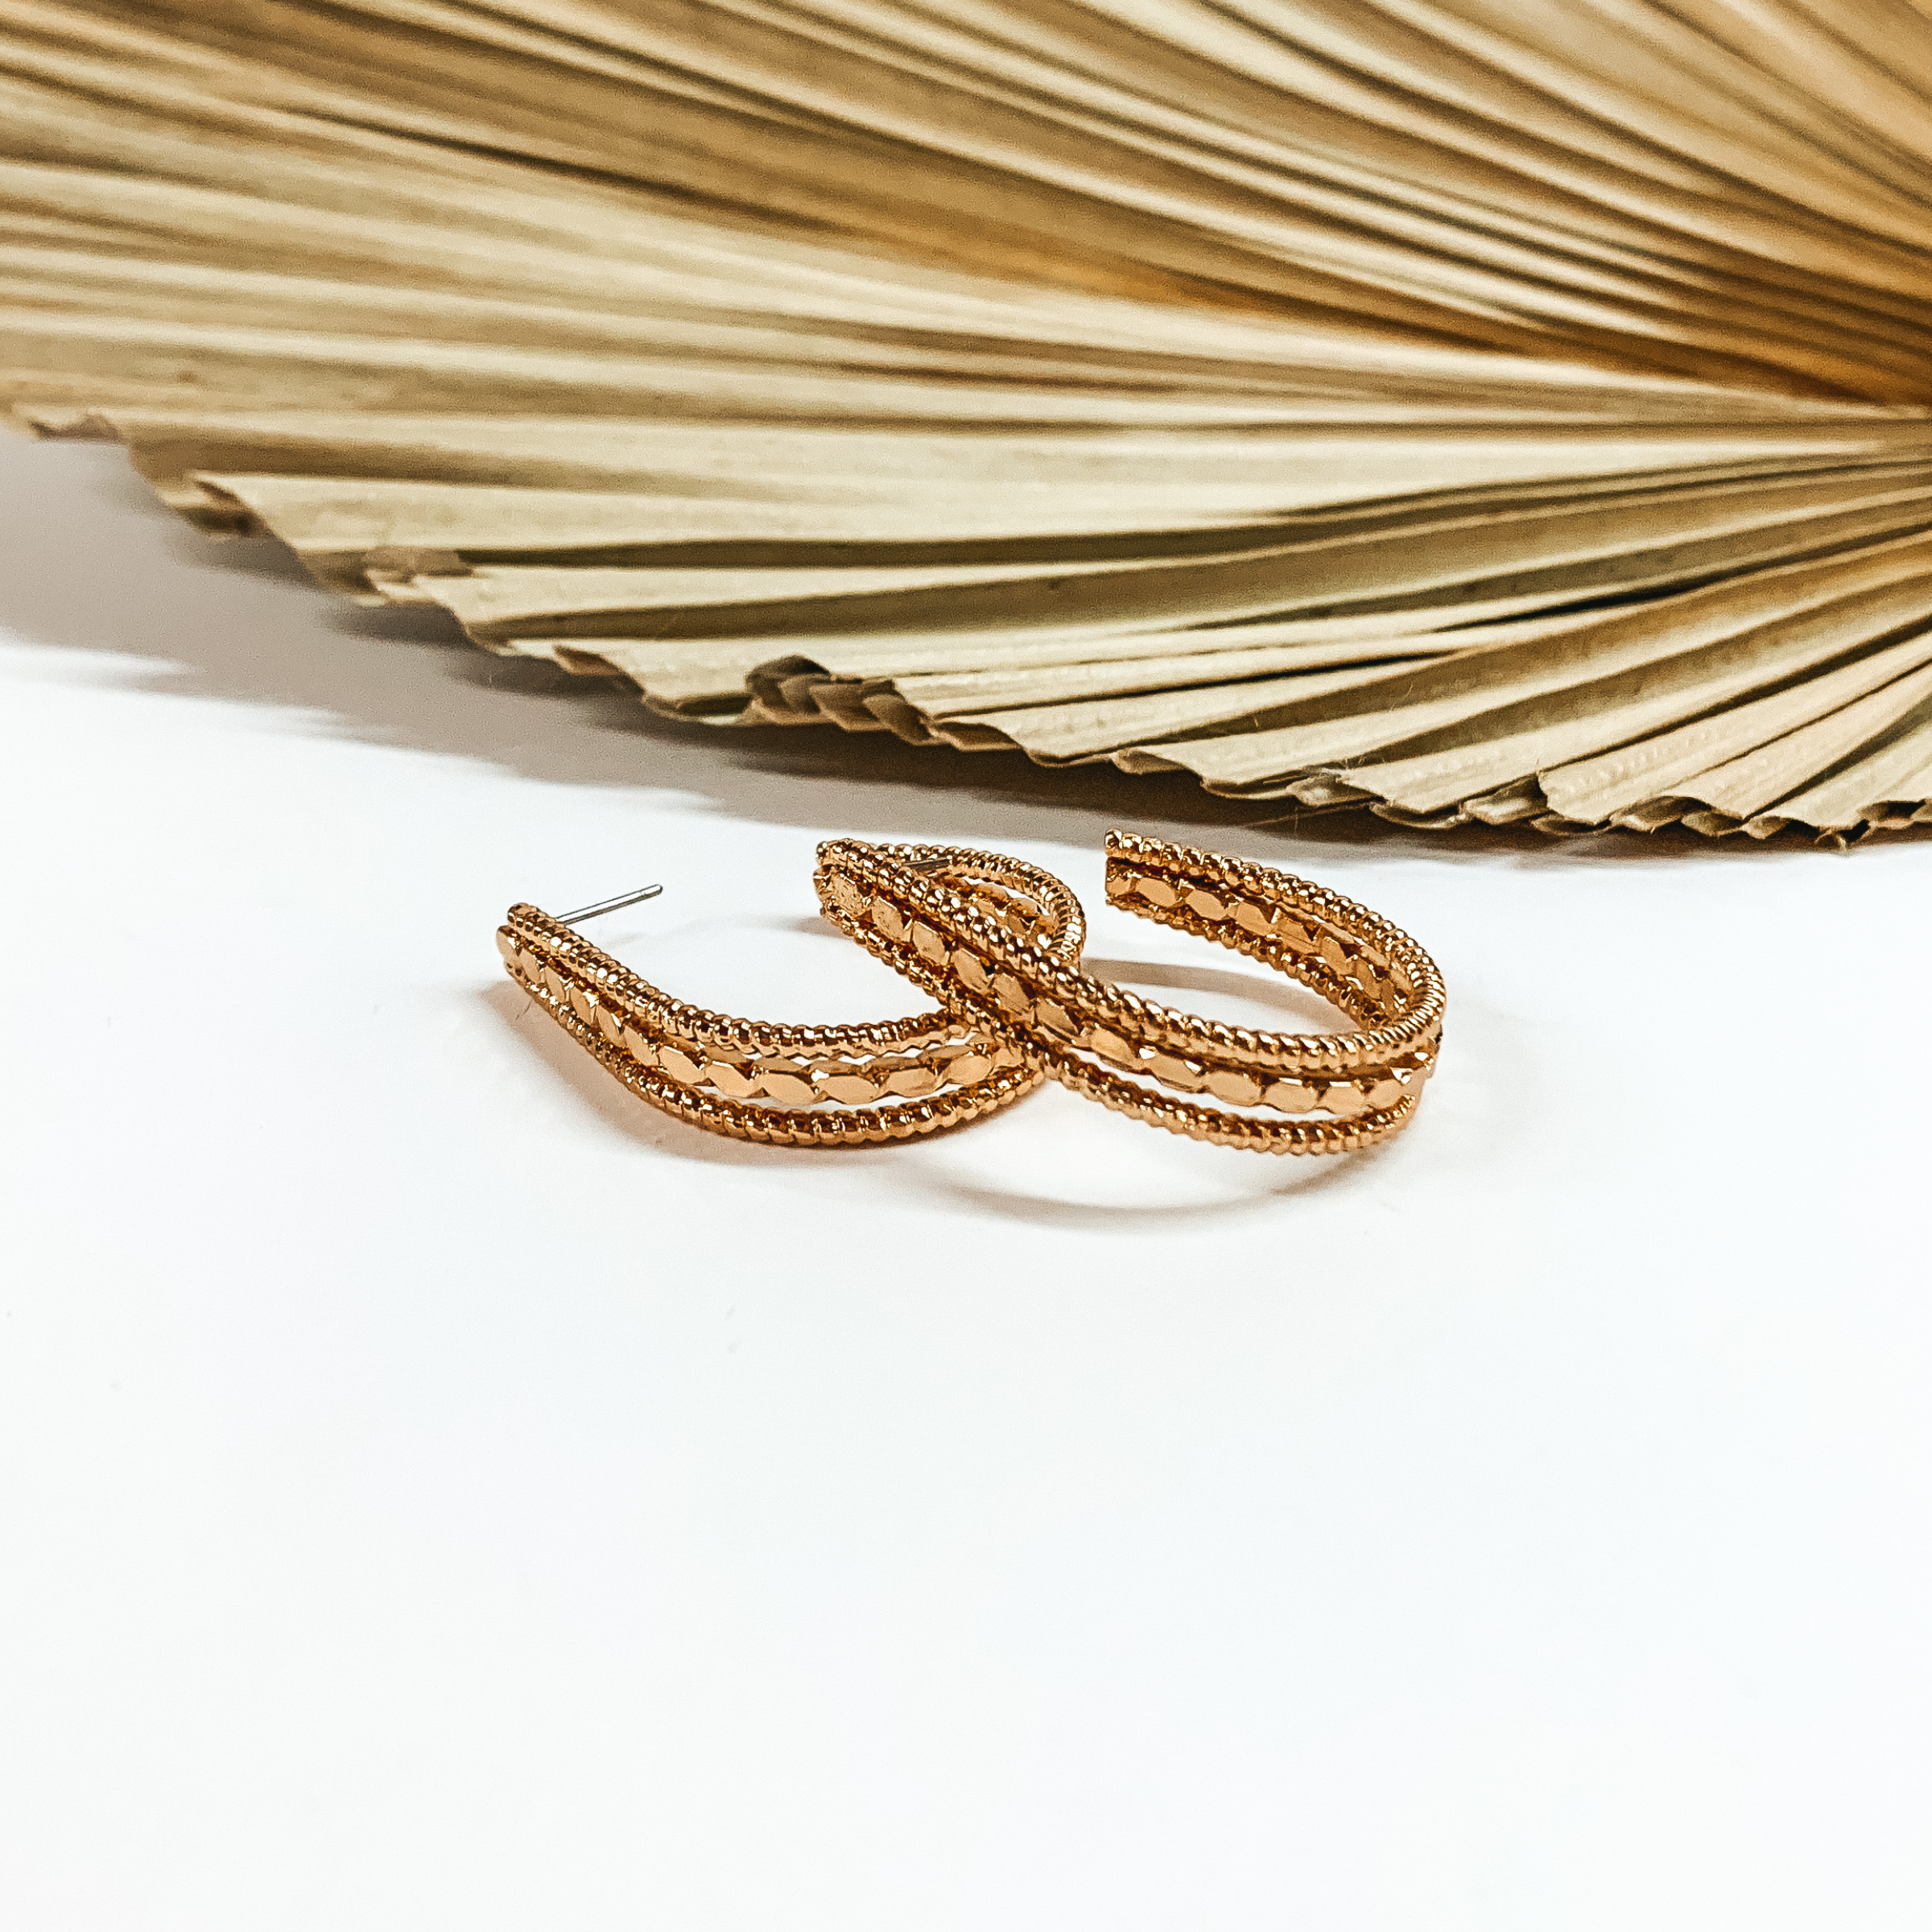 Teardrop, gold hoop earrings with different textures. These earrings are pictured in front a sage green leaf on a white background. 